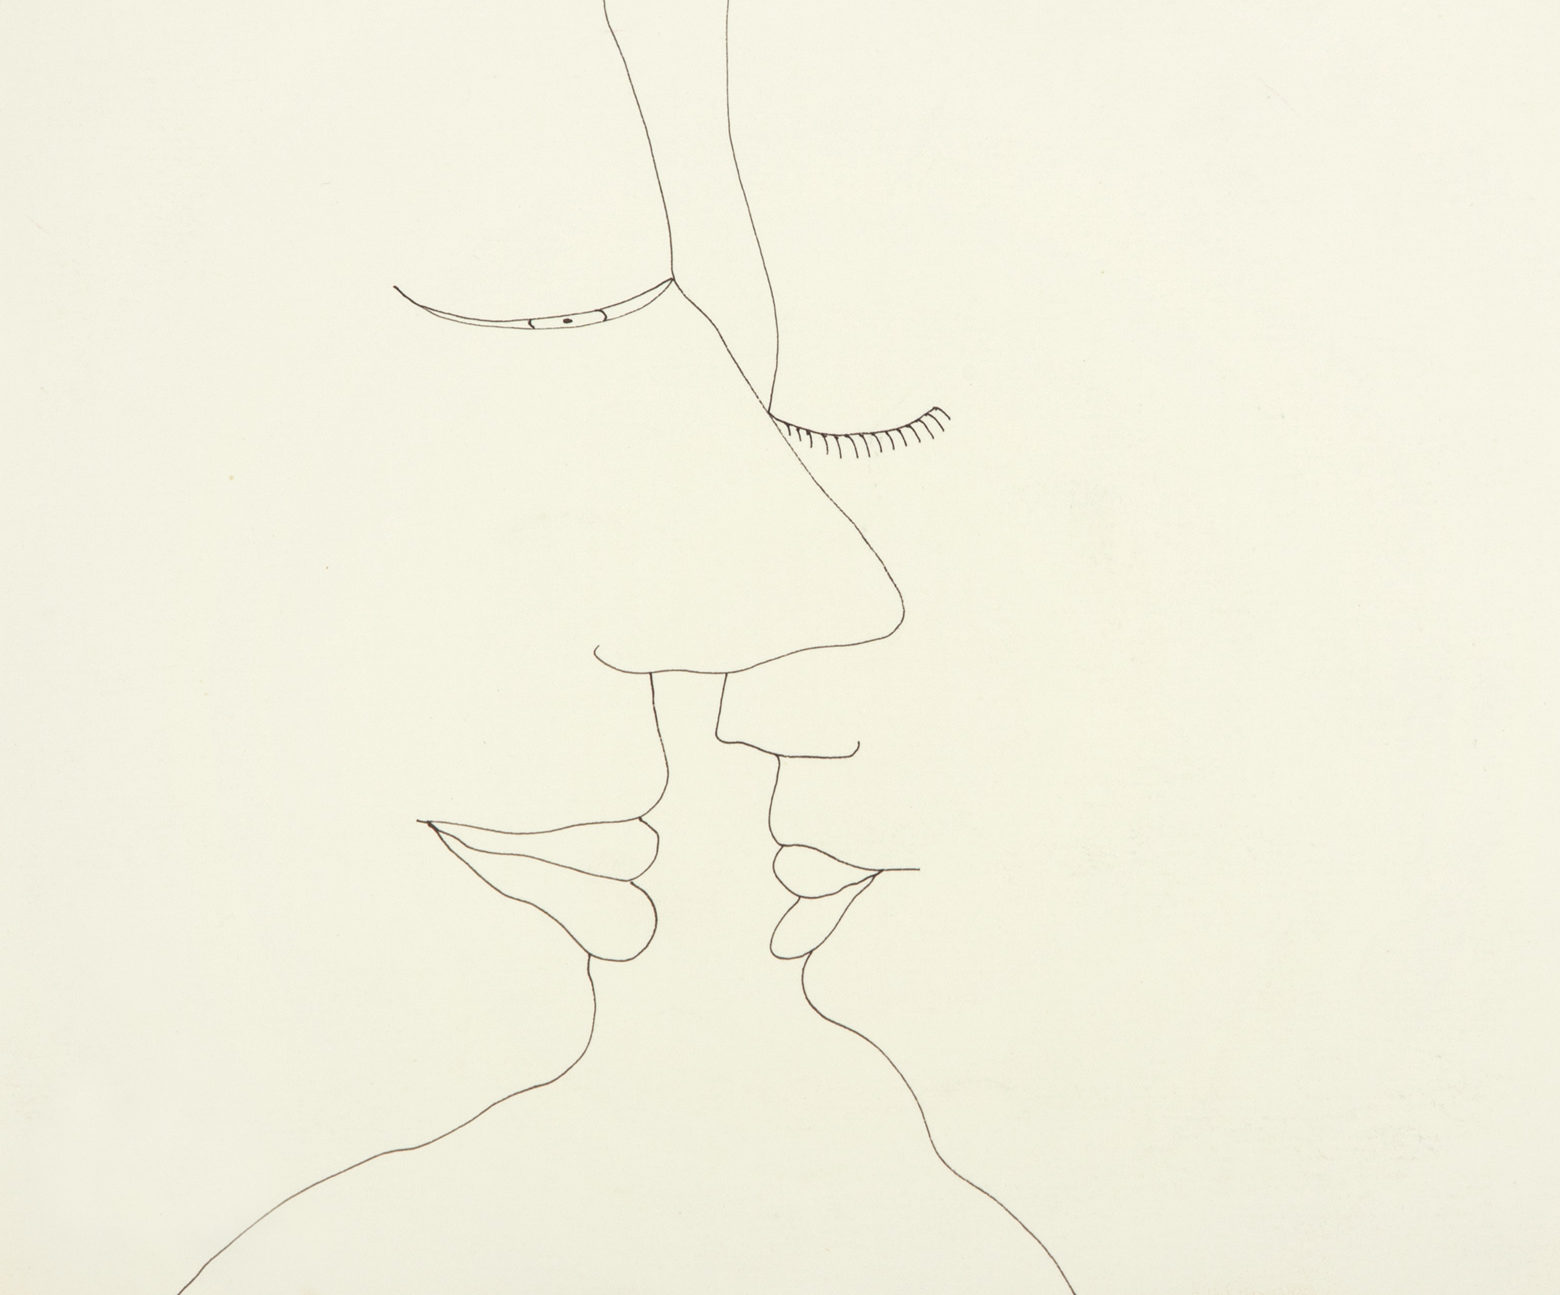 A sketch of two people, face-to-face